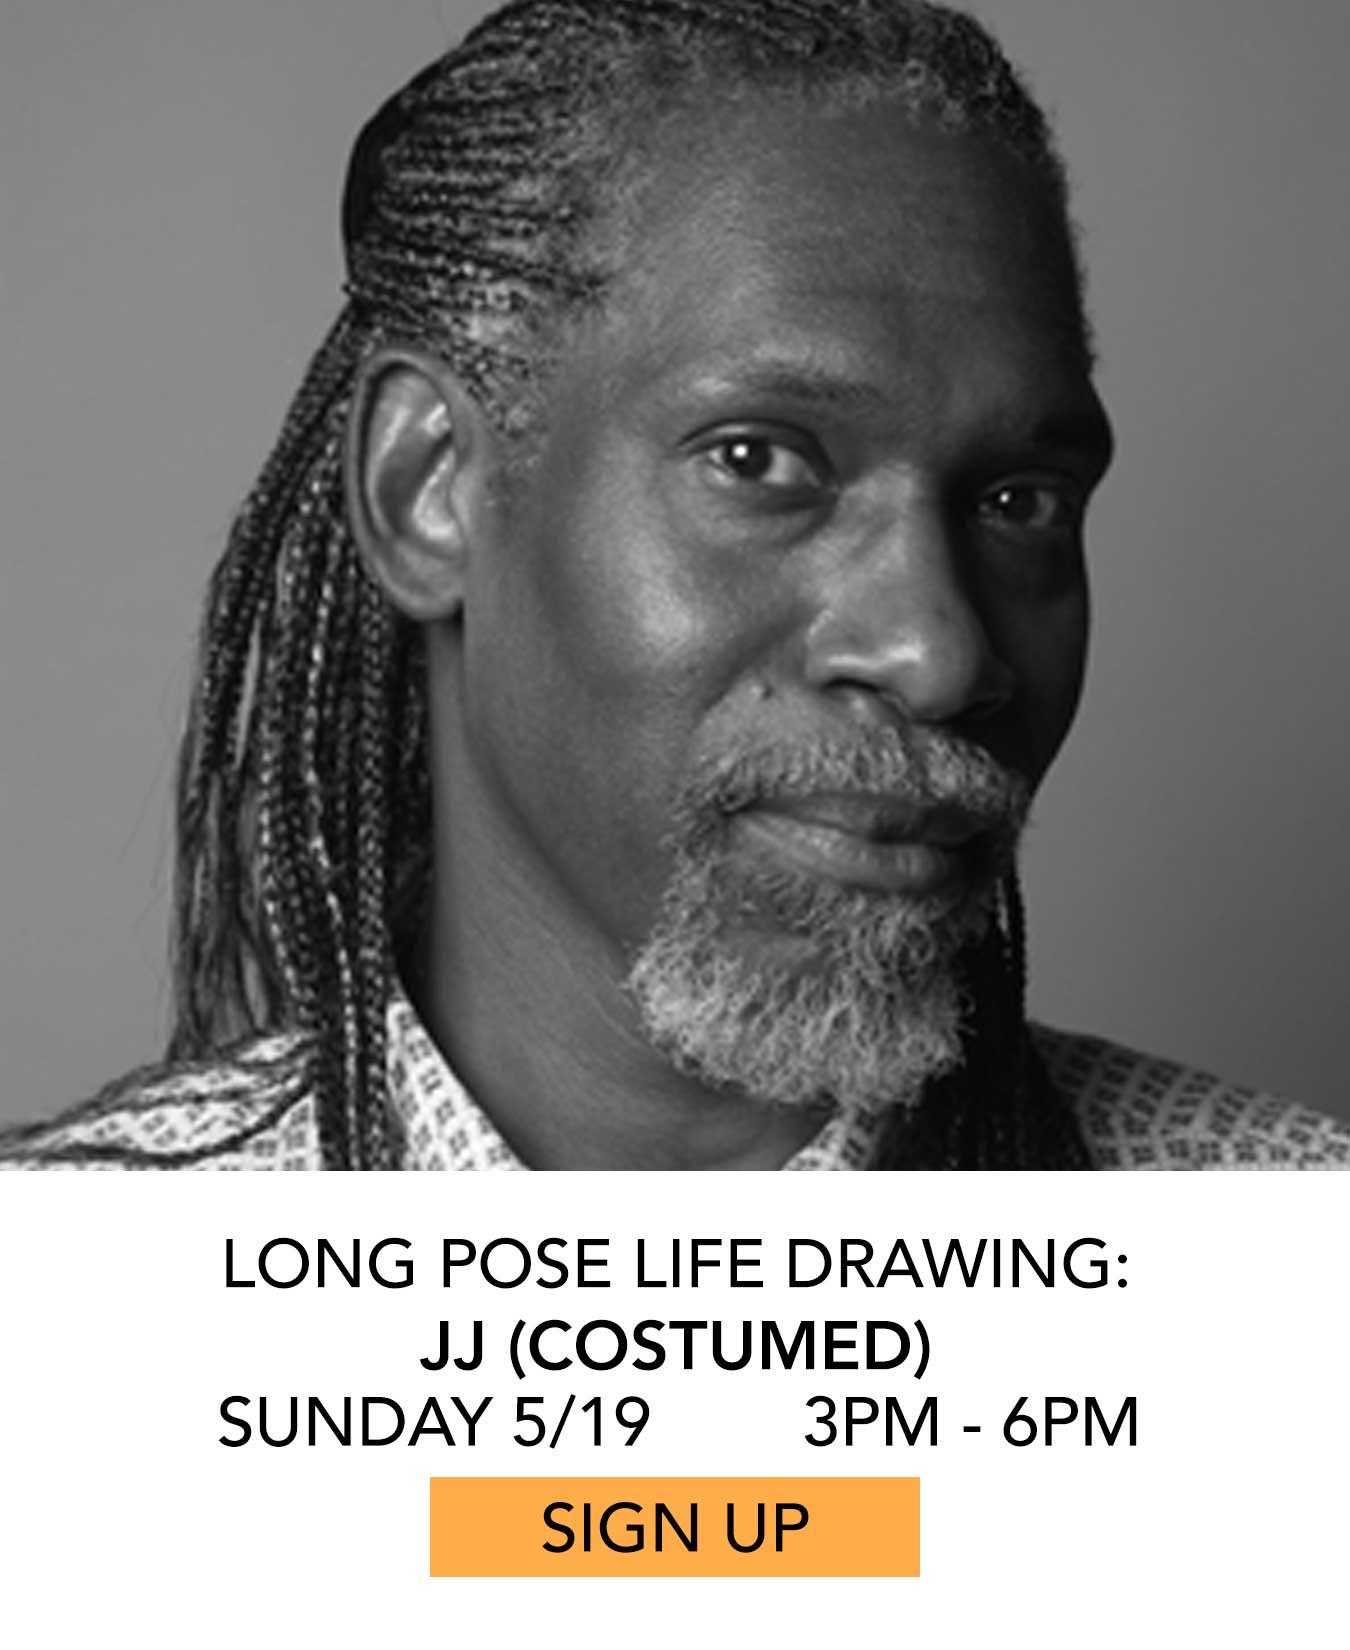 Life Drawing: JJ (costumed). Sunday 5/19 from 3pm to 6pm. Click to Sign Up.